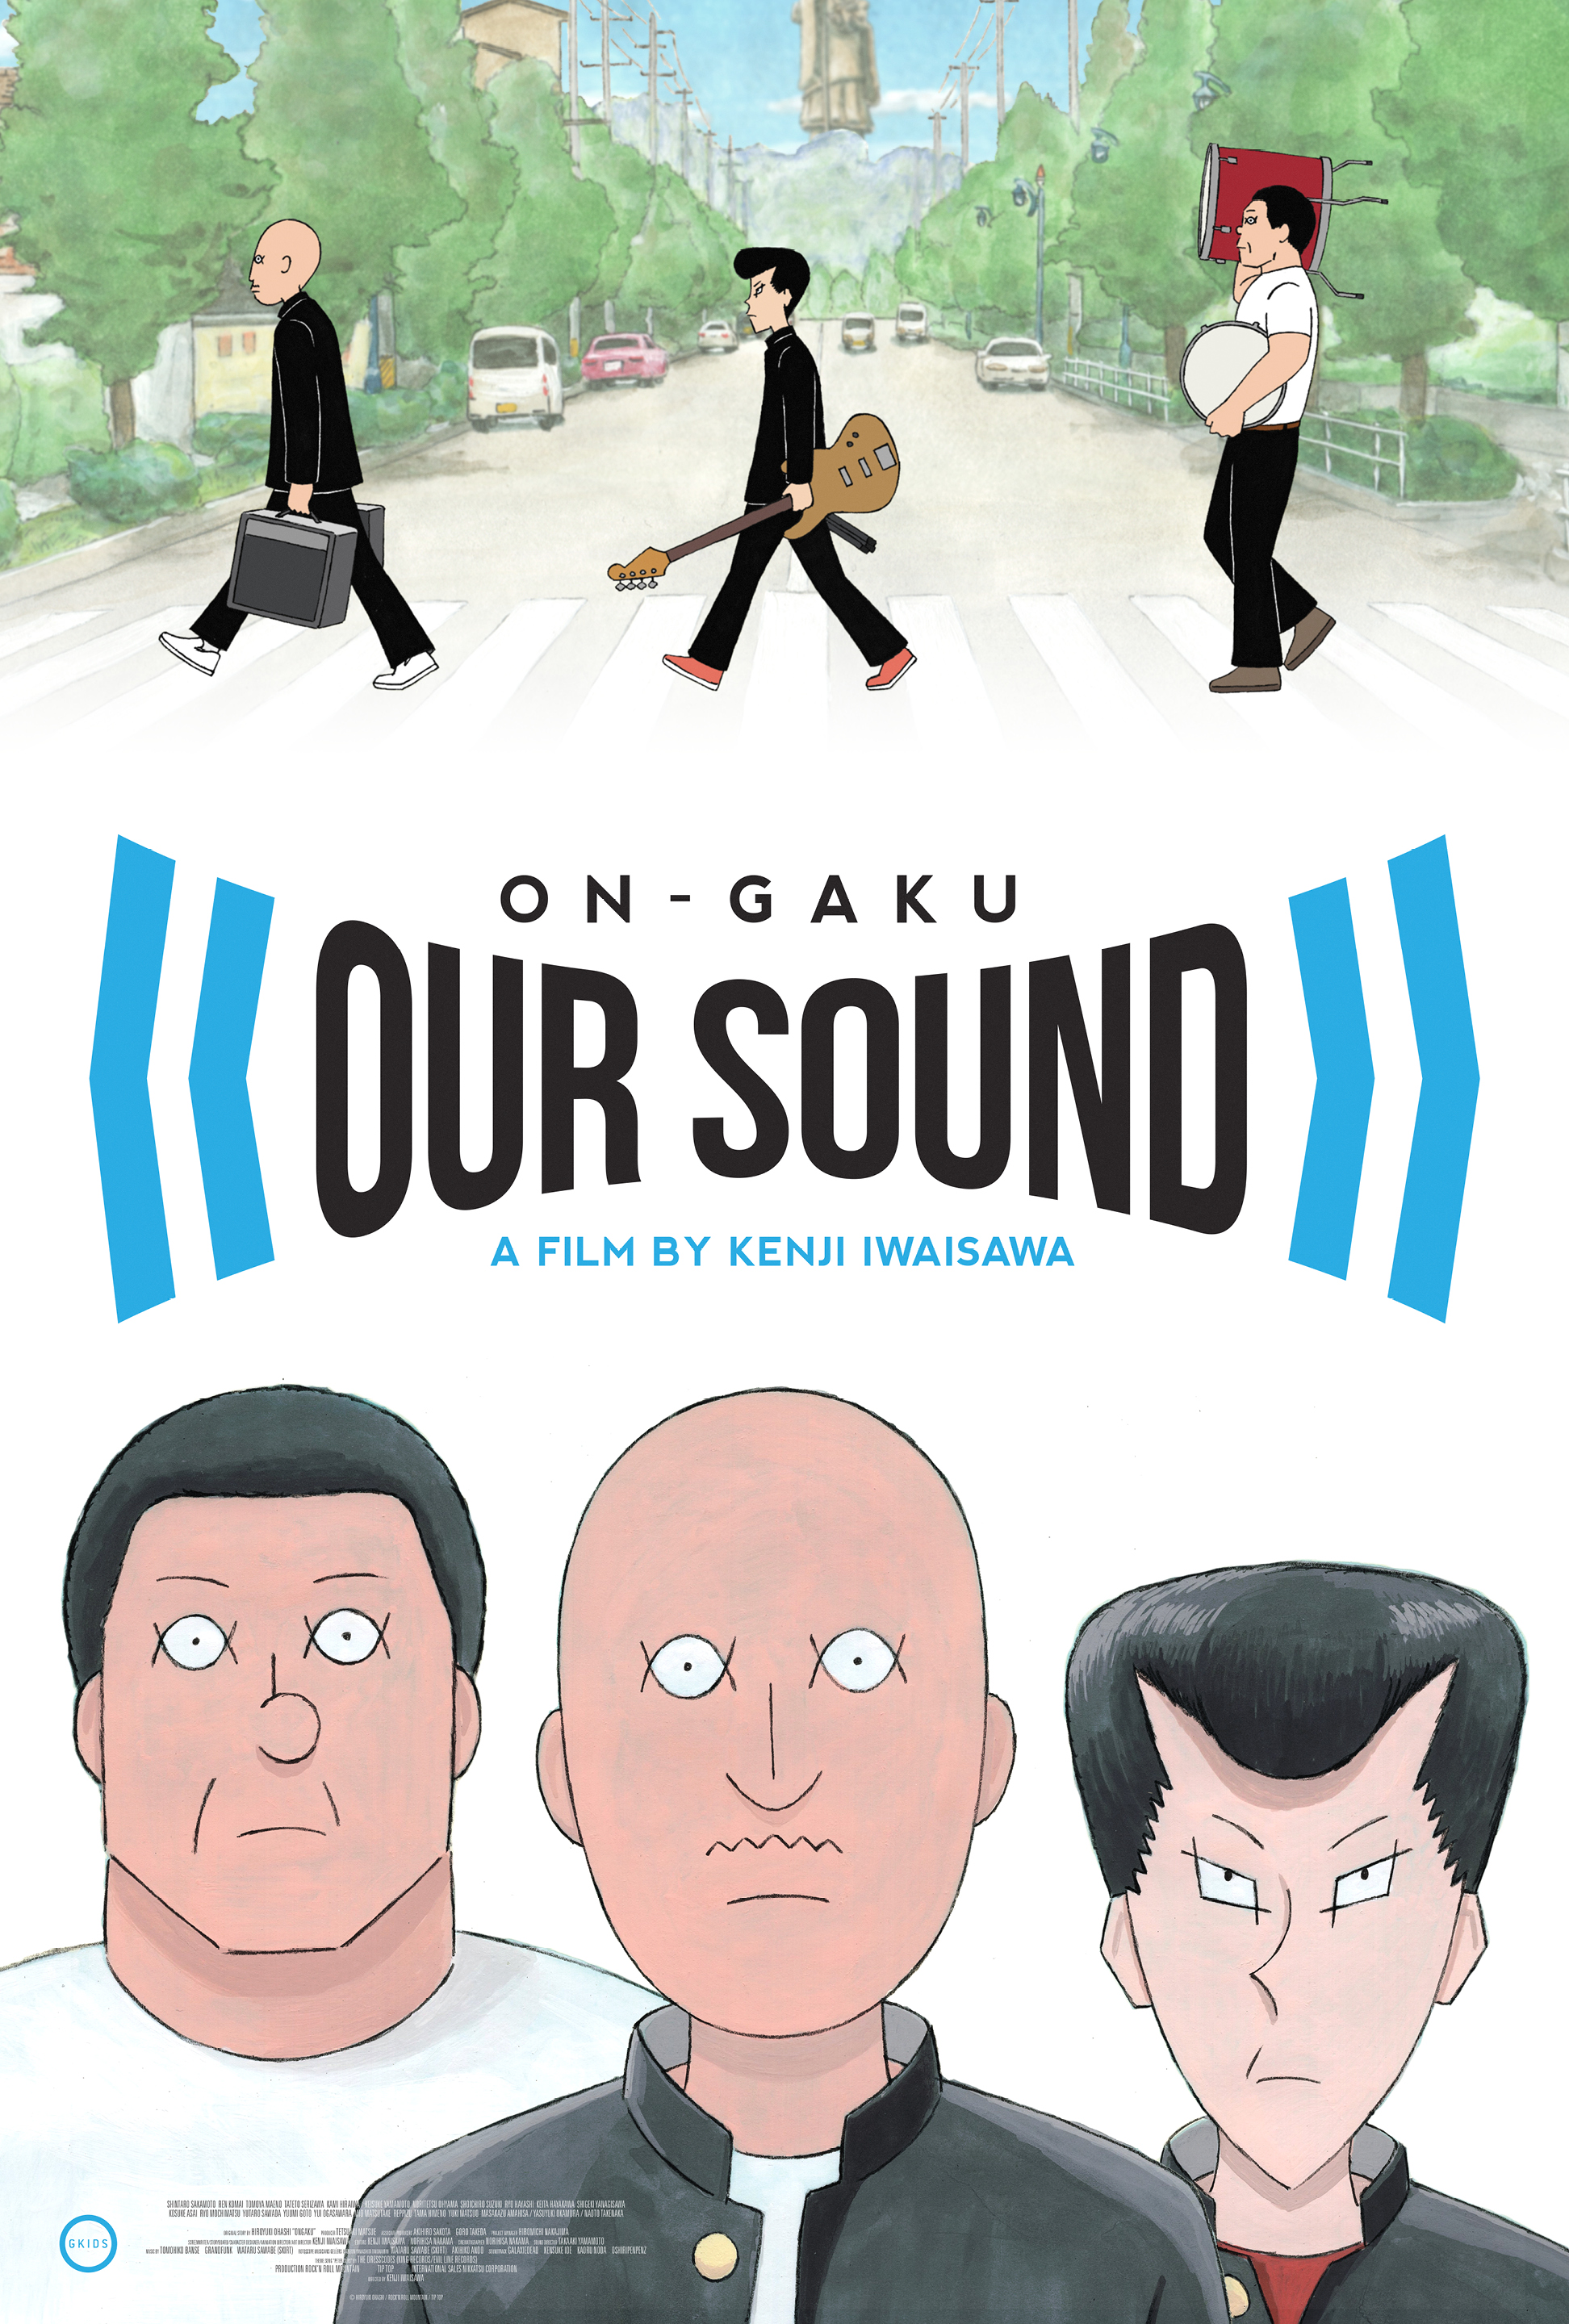 The official movie poster for the GKIDS release of ON-GAKU: Our Sound, featuring the characters of Kenji, Ota, and Asakura accidentally re-creating the iconic cover of the Beatles' Abbey Road album while crossing the street carrying their musical instruments. The poster also features a medium close-up image of the trio's faces beneath the movie's logo and director Kenji Iwaisawa's credit.